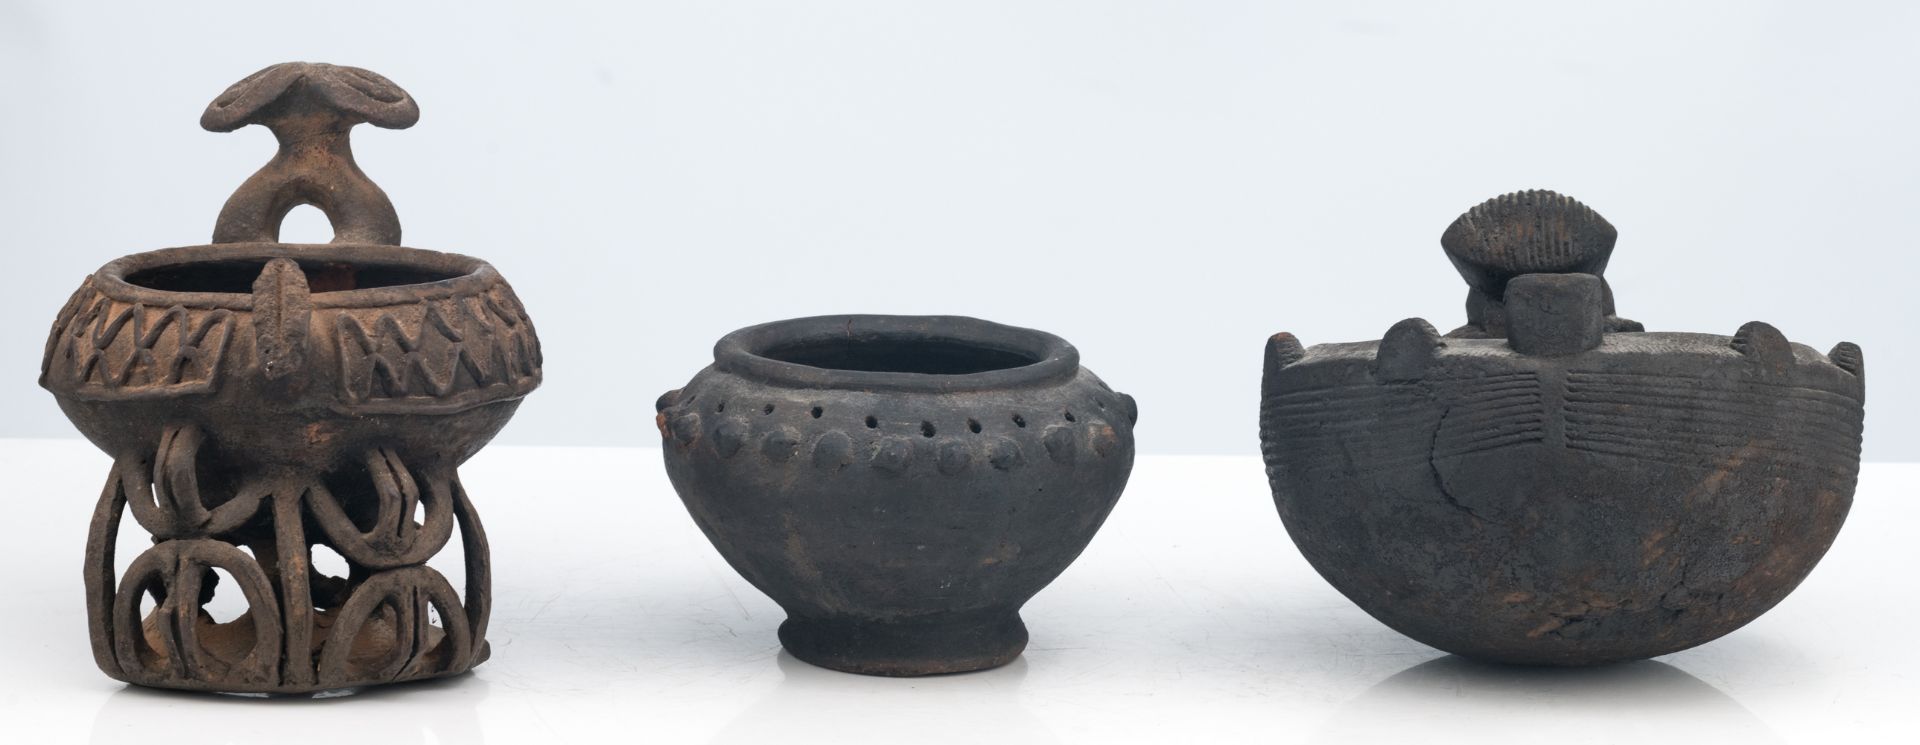 Three African relief decorated pots, one of which on stand, Bamum - Cameroon, H 10 - 19 cm - Bild 2 aus 2